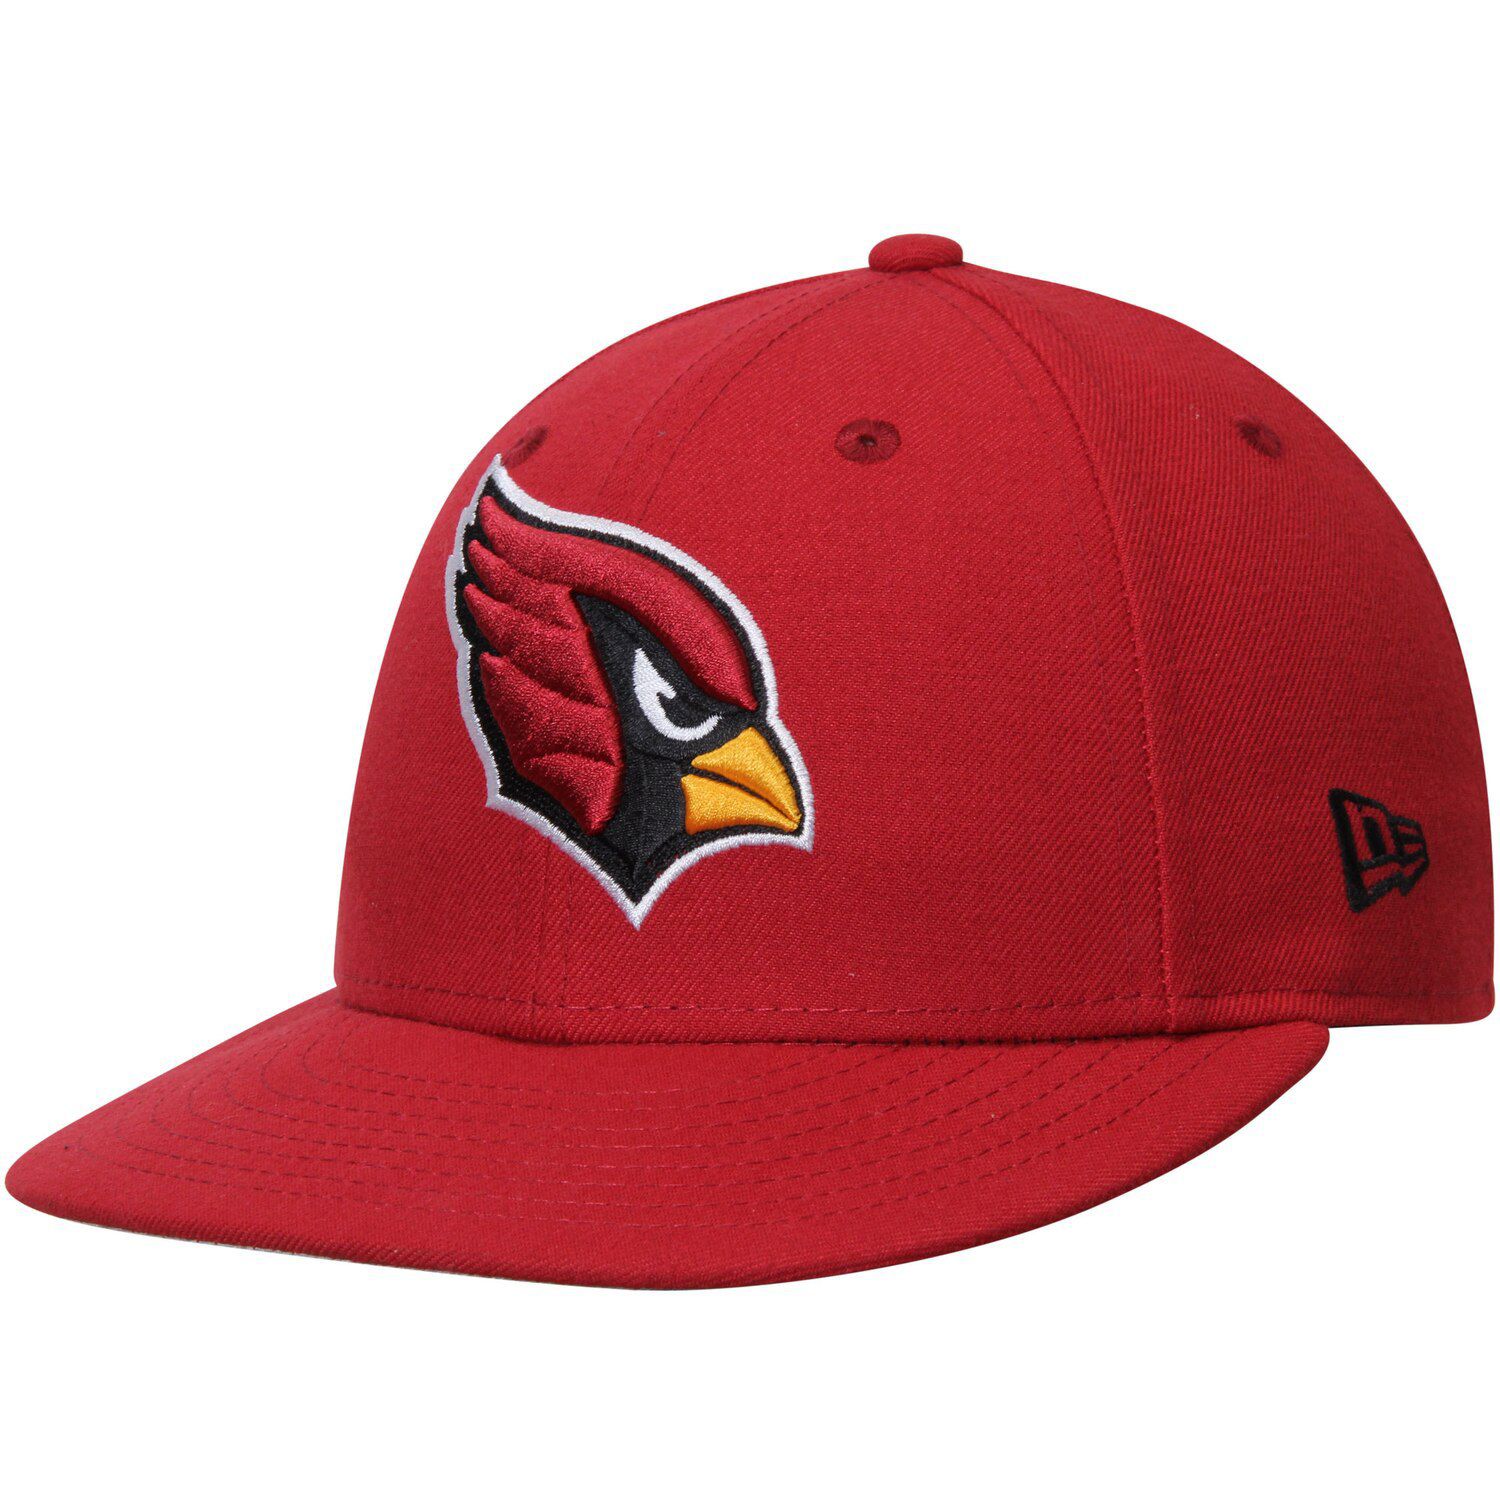 Lids Ball State Cardinals Top of the World Slice Adjustable Hat